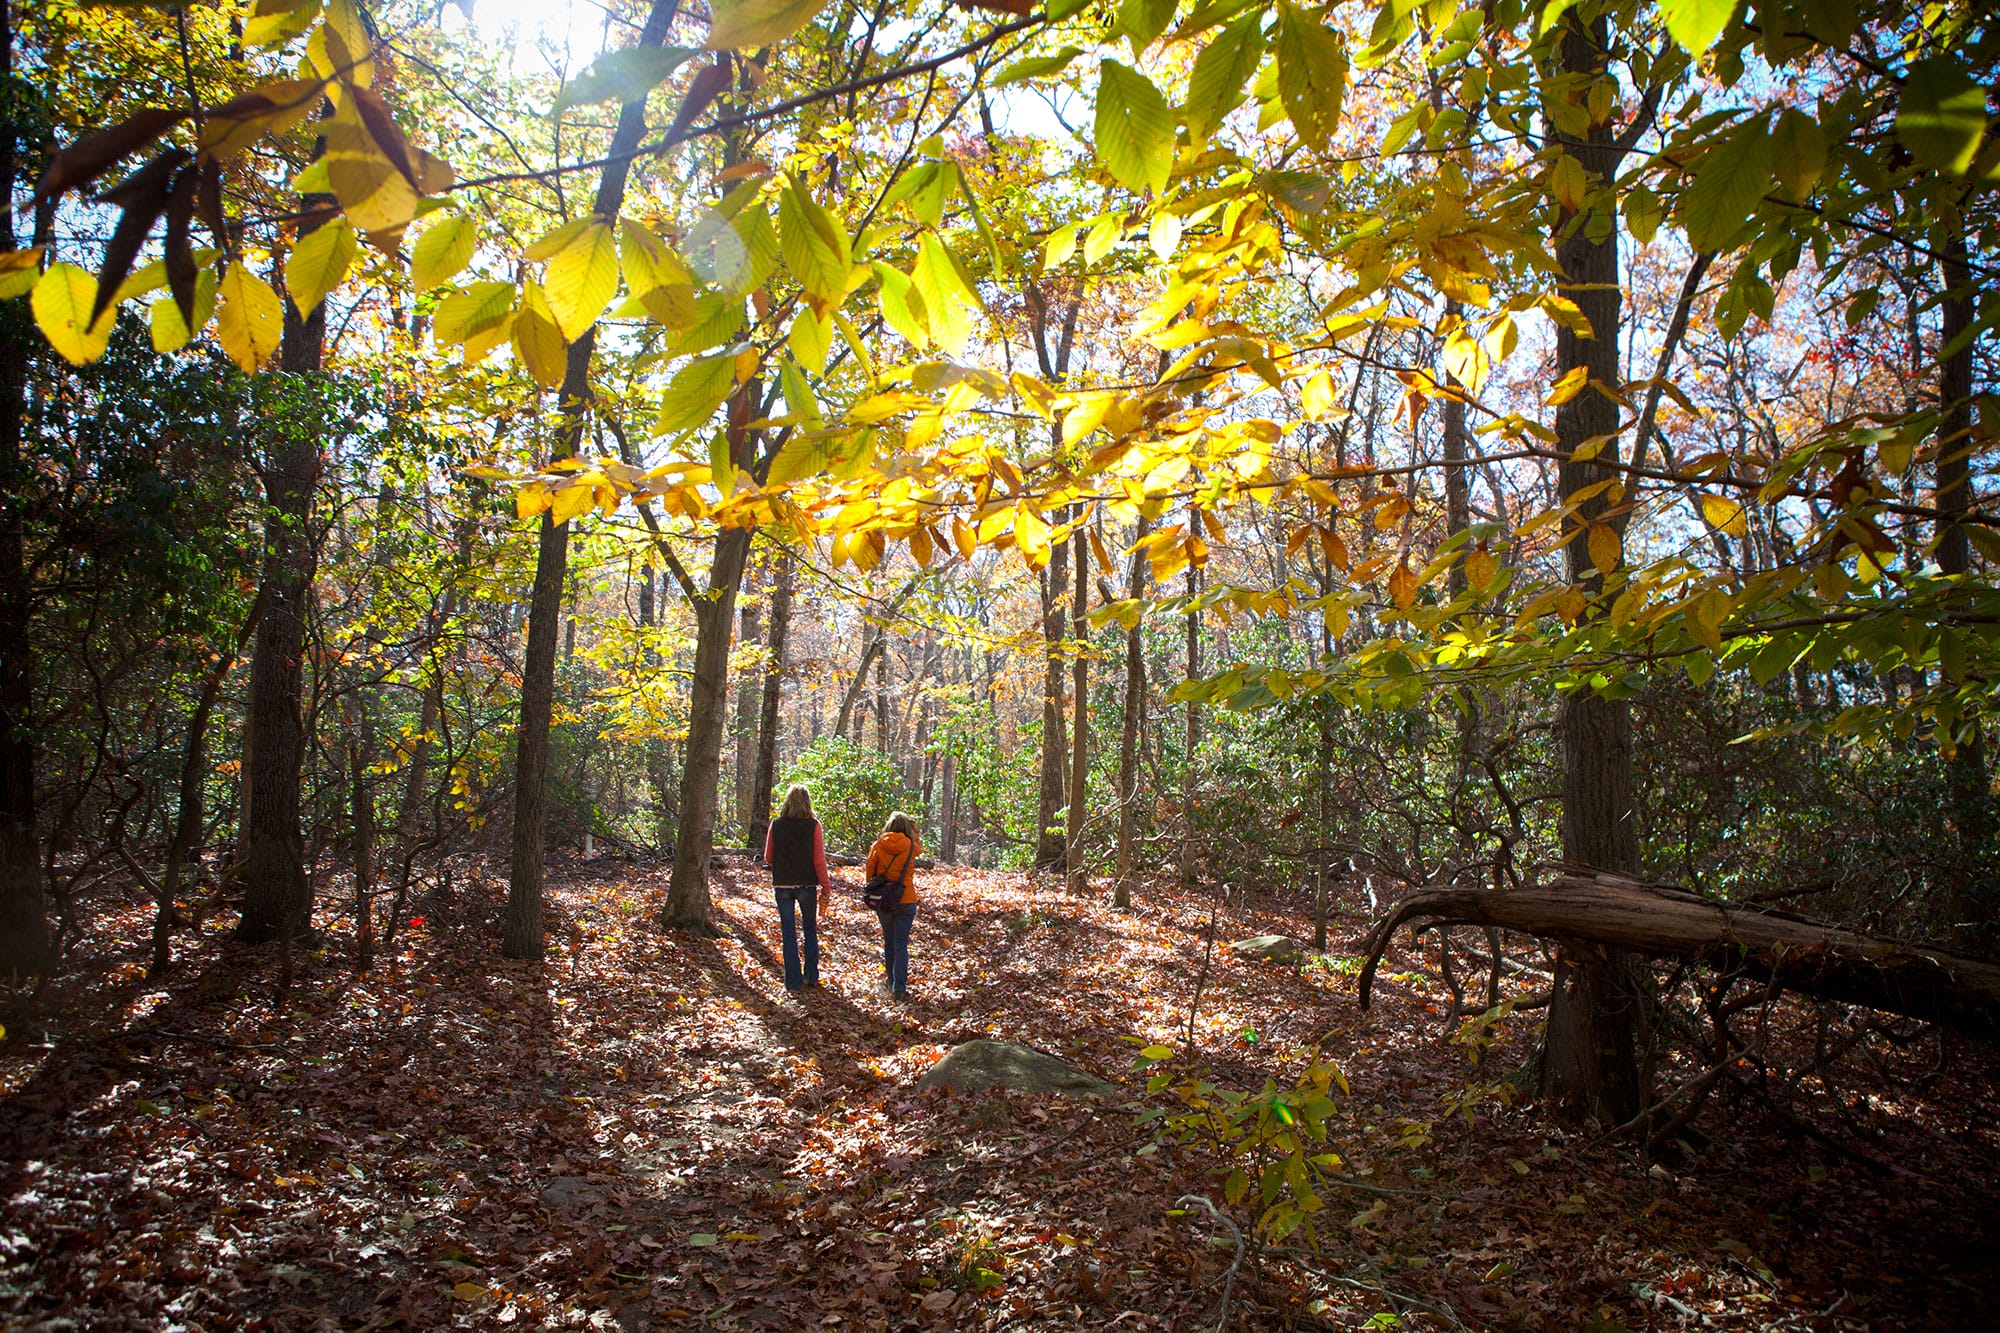 Two people walking through a wooded area.